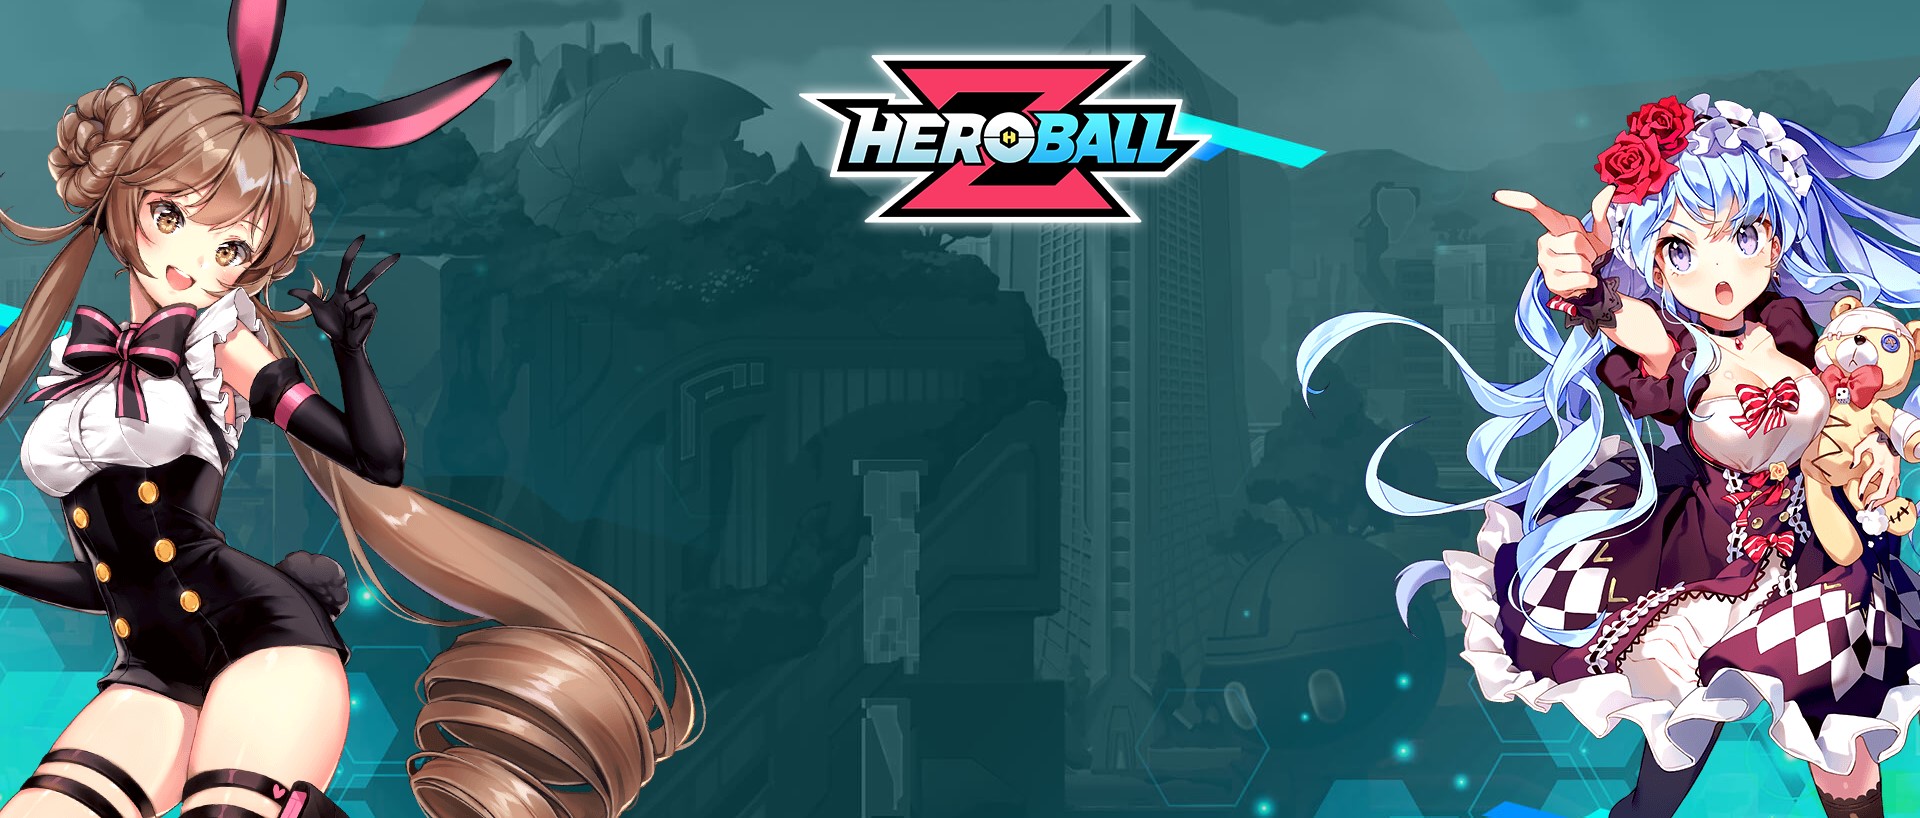 Download & Play Hero Ball Z on PC & Mac with NoxPlayer (Emulator)